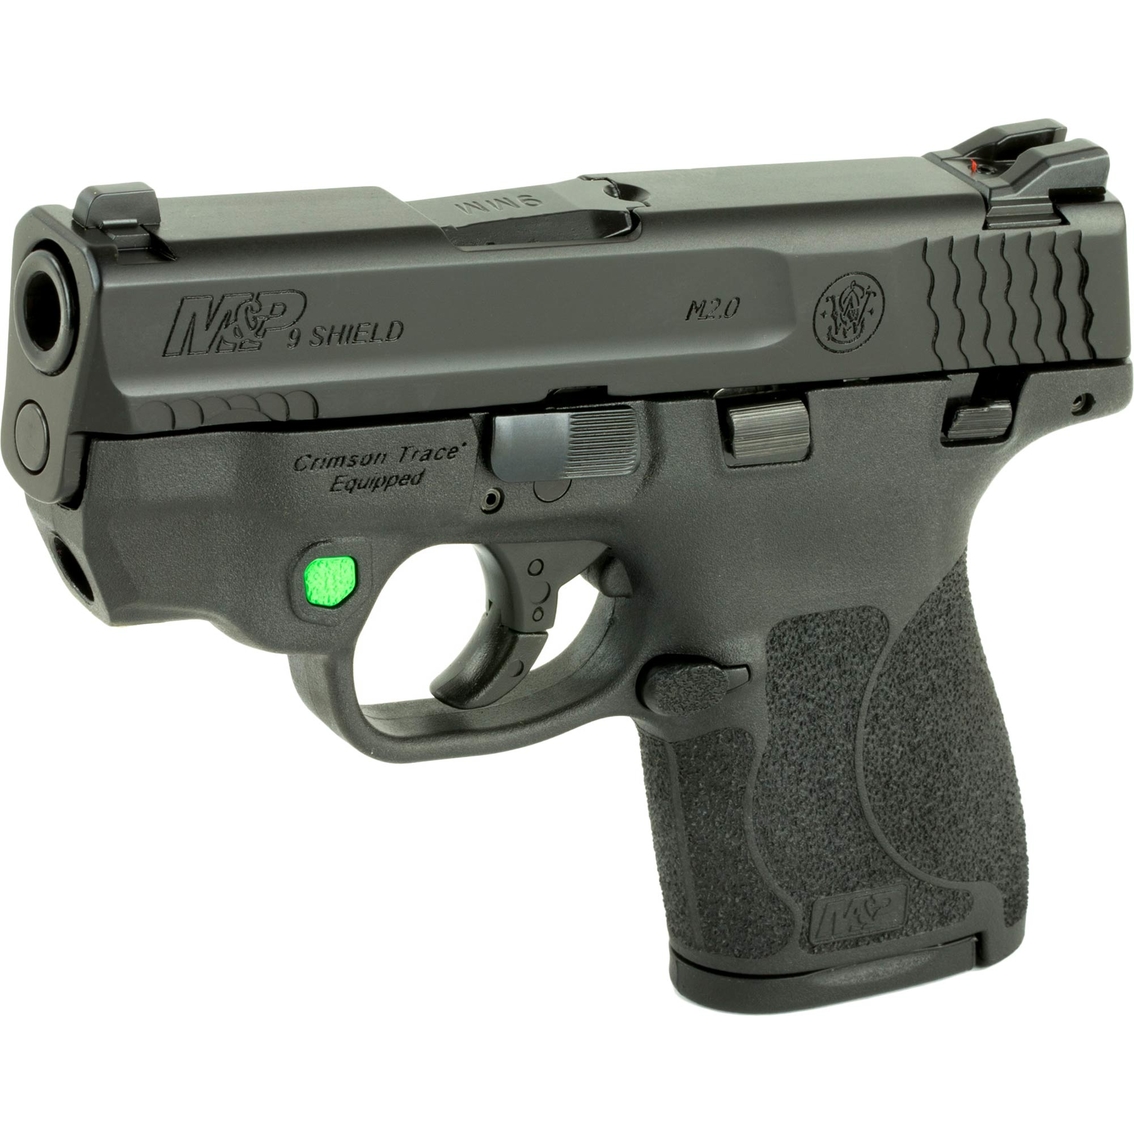 S&W Shield M2.0 9MM 3.1 in. Barrel 8 Rd 2-Mags Pistol Black with Safety Green Laser - Image 3 of 3